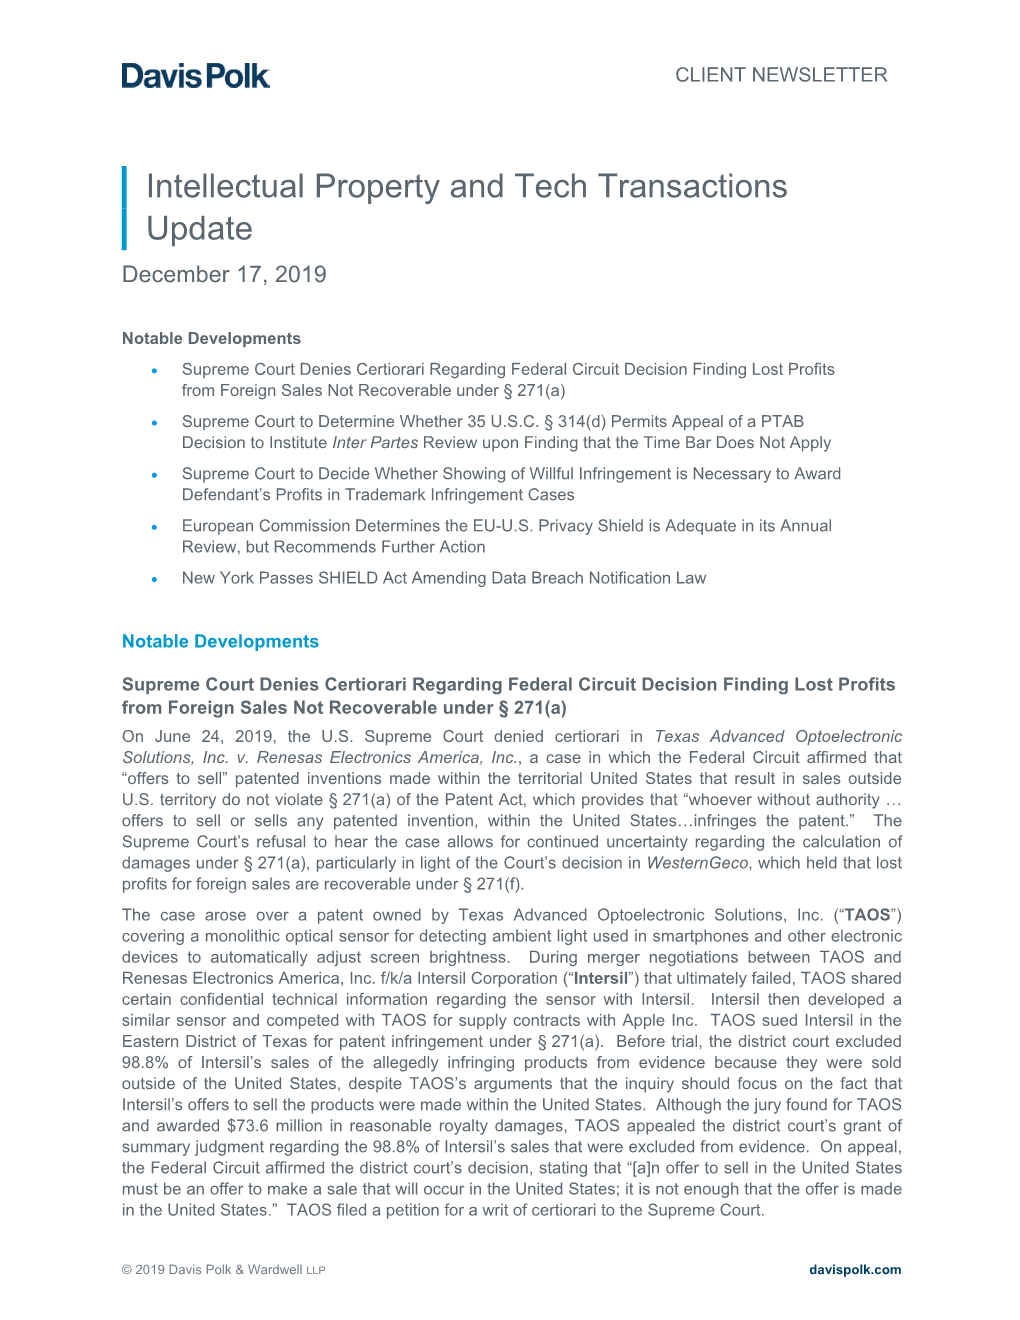 Intellectual Property and Tech Transactions Update December 17, 2019